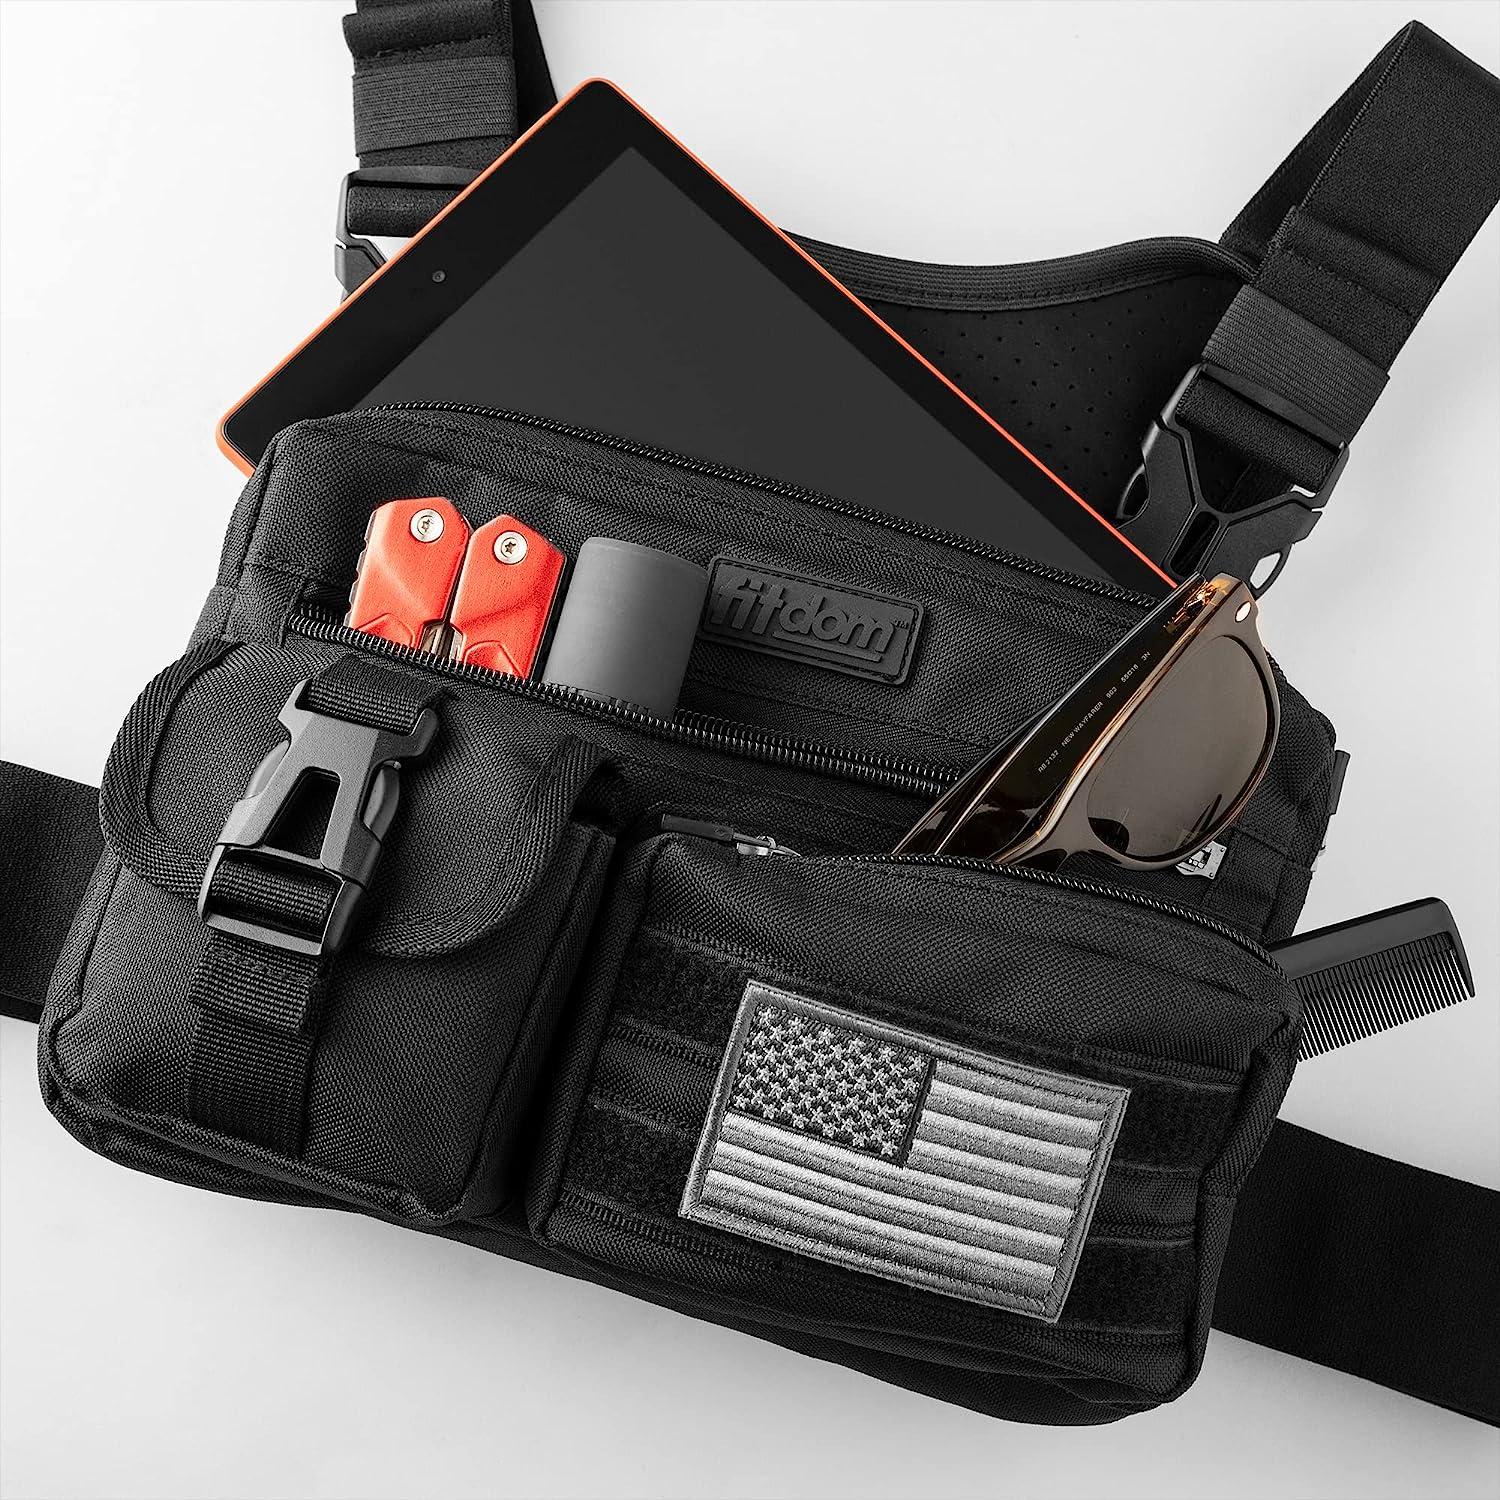 Fitdom Tactical Inspired Sports Utility Chest Pack. Chest Bag For